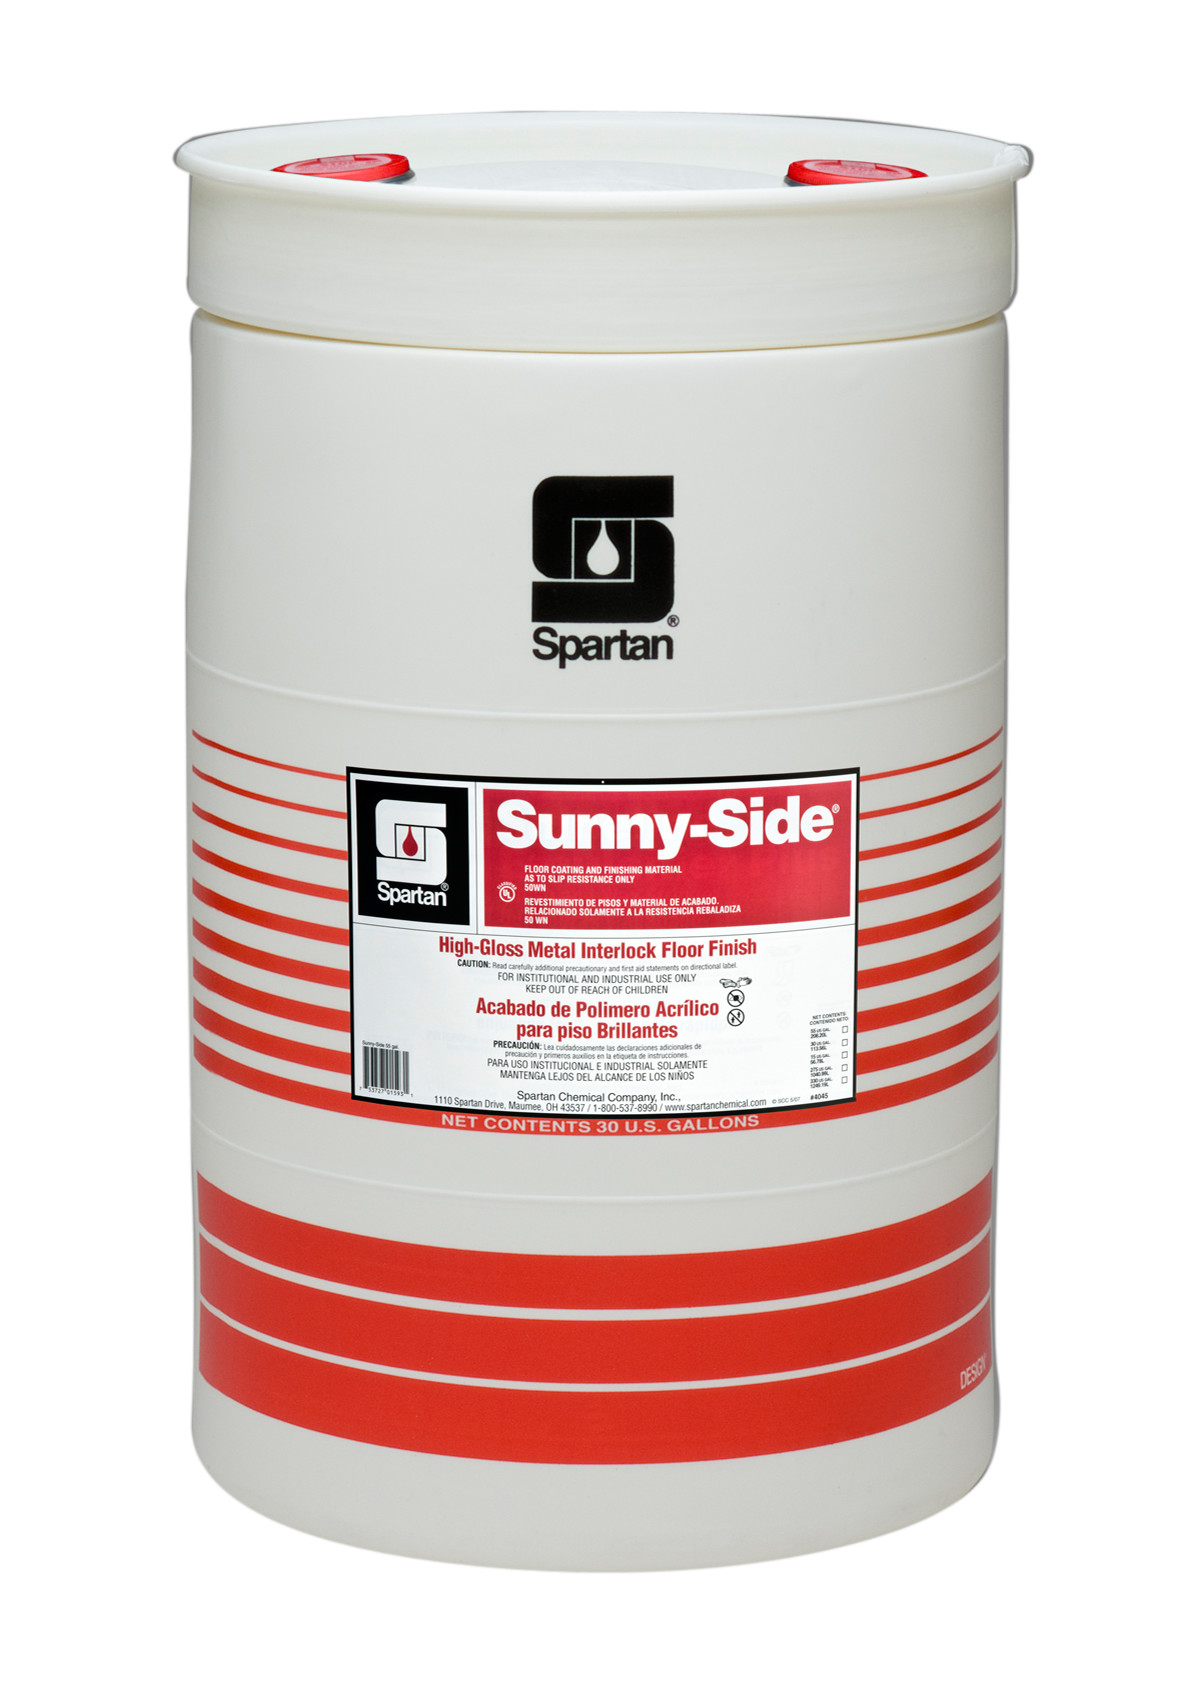 Spartan Chemical Company Sunny-Side, 30 GAL DRUM